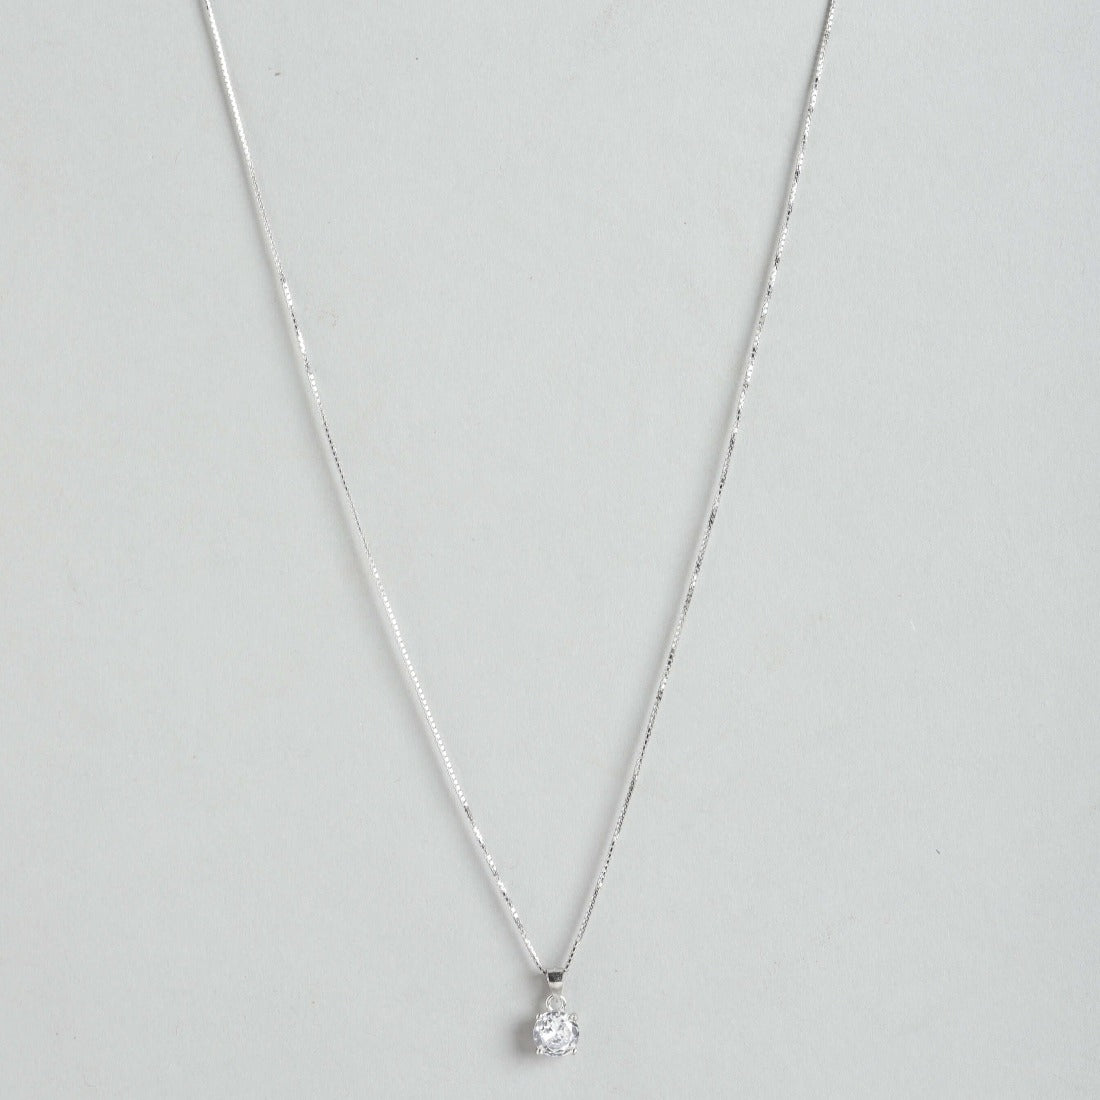 Solitaire 925 Silver Necklace